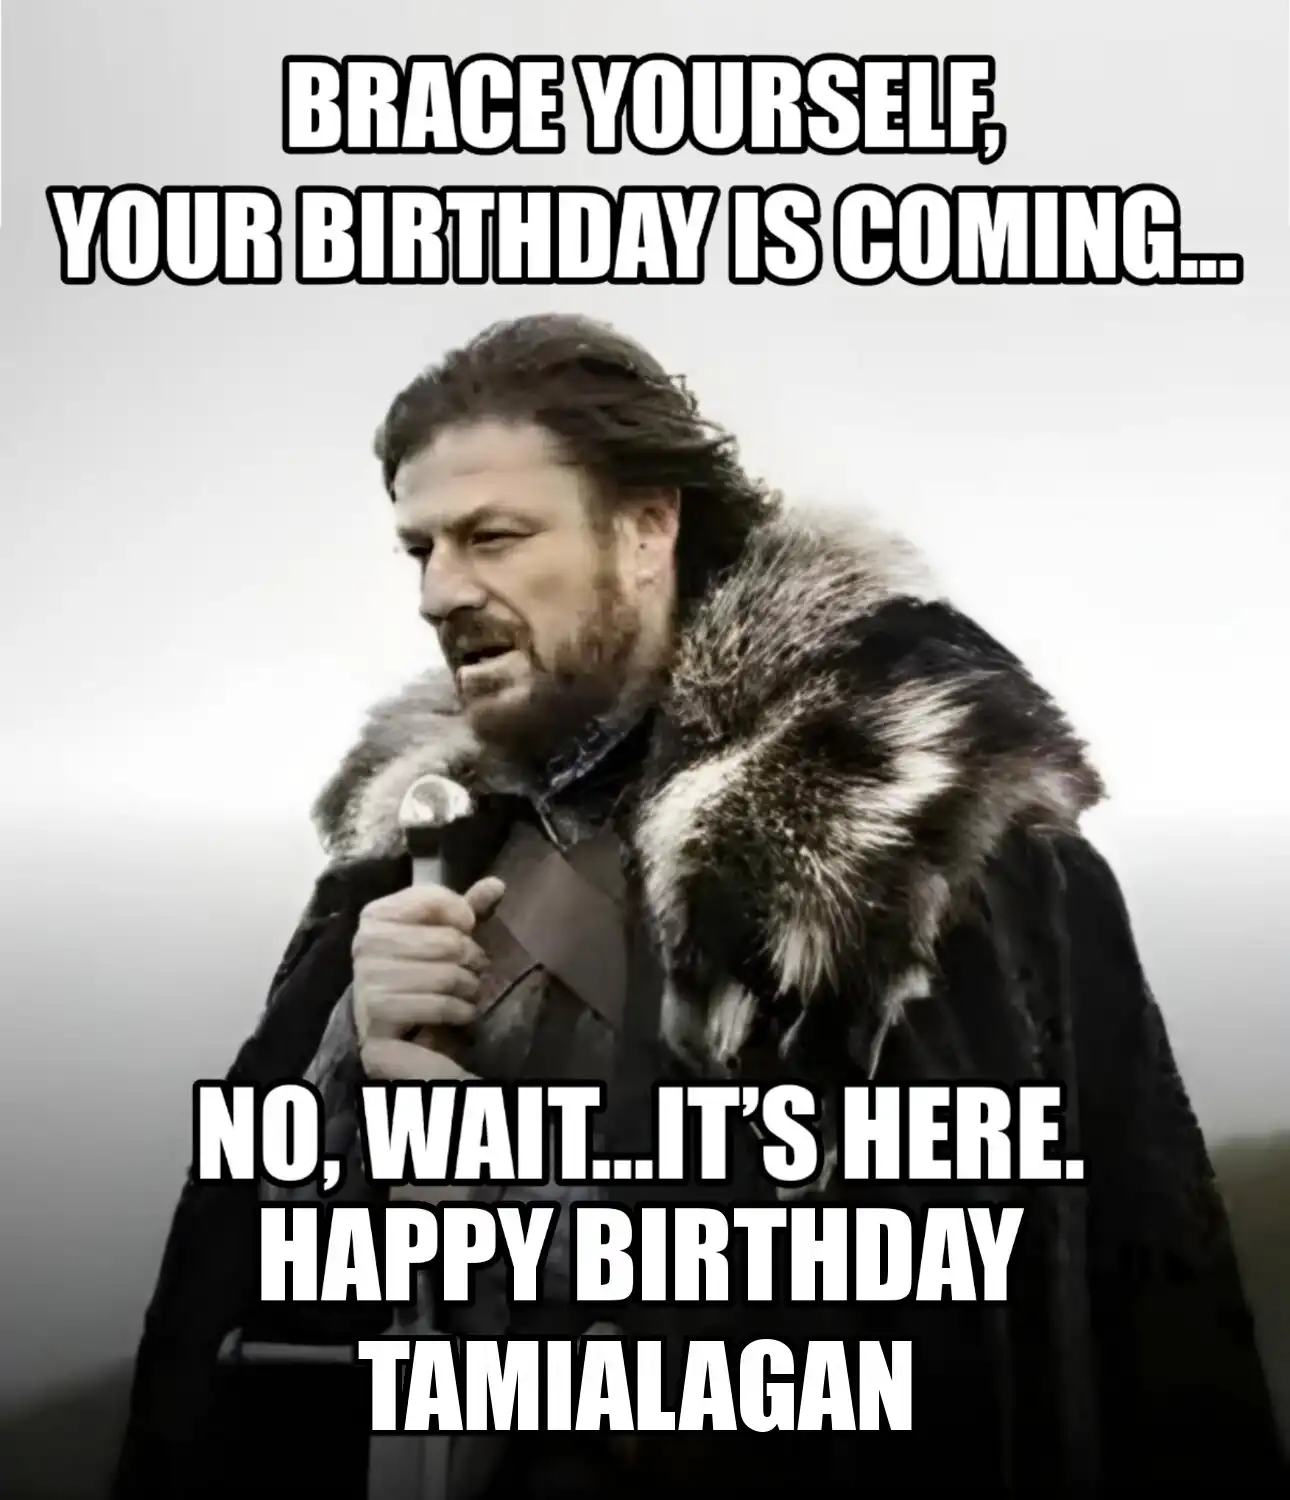 Happy Birthday Tamialagan Brace Yourself Your Birthday Is Coming Meme